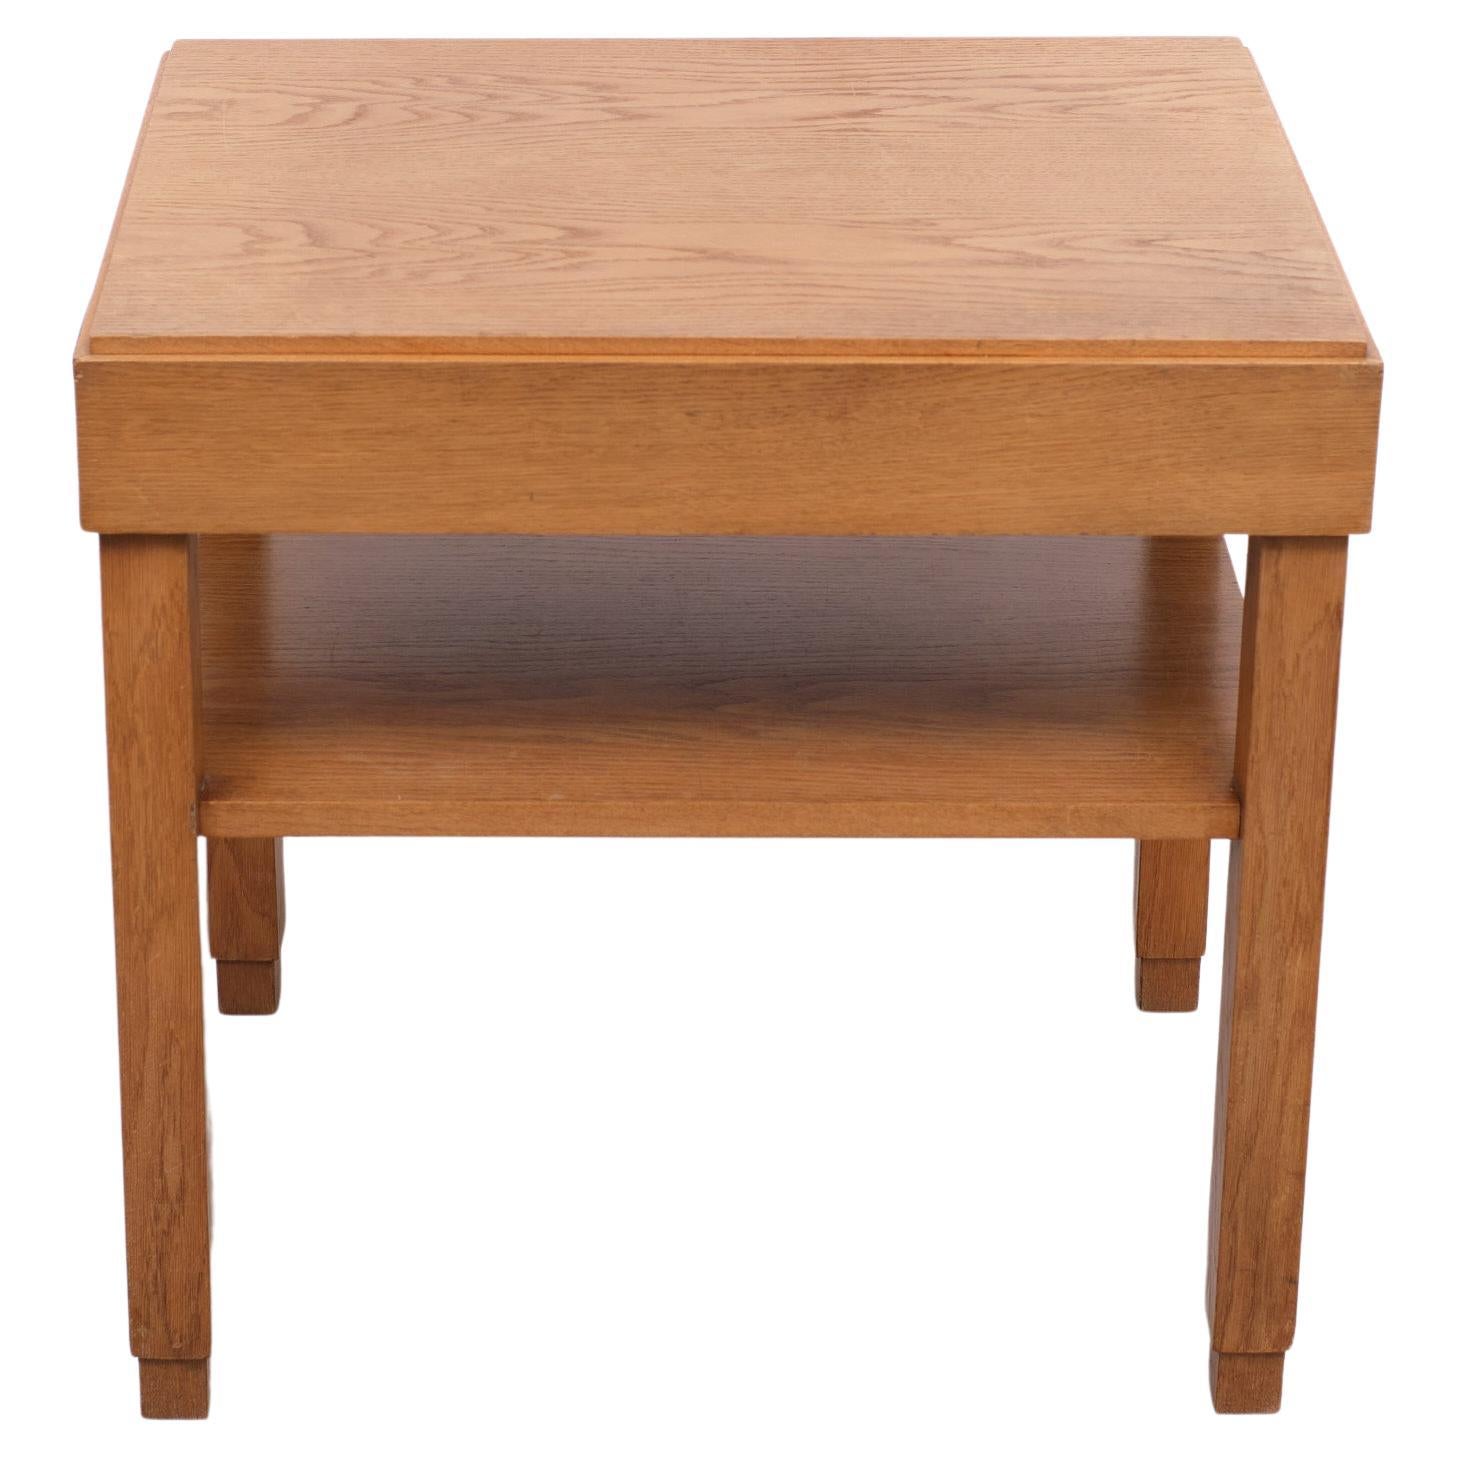 Very nice minimalist two tier side table. Executed in Oak. Minimalist Dutch Art Deco, This style furniture also called Amsterdamse School or Haagse School.
 